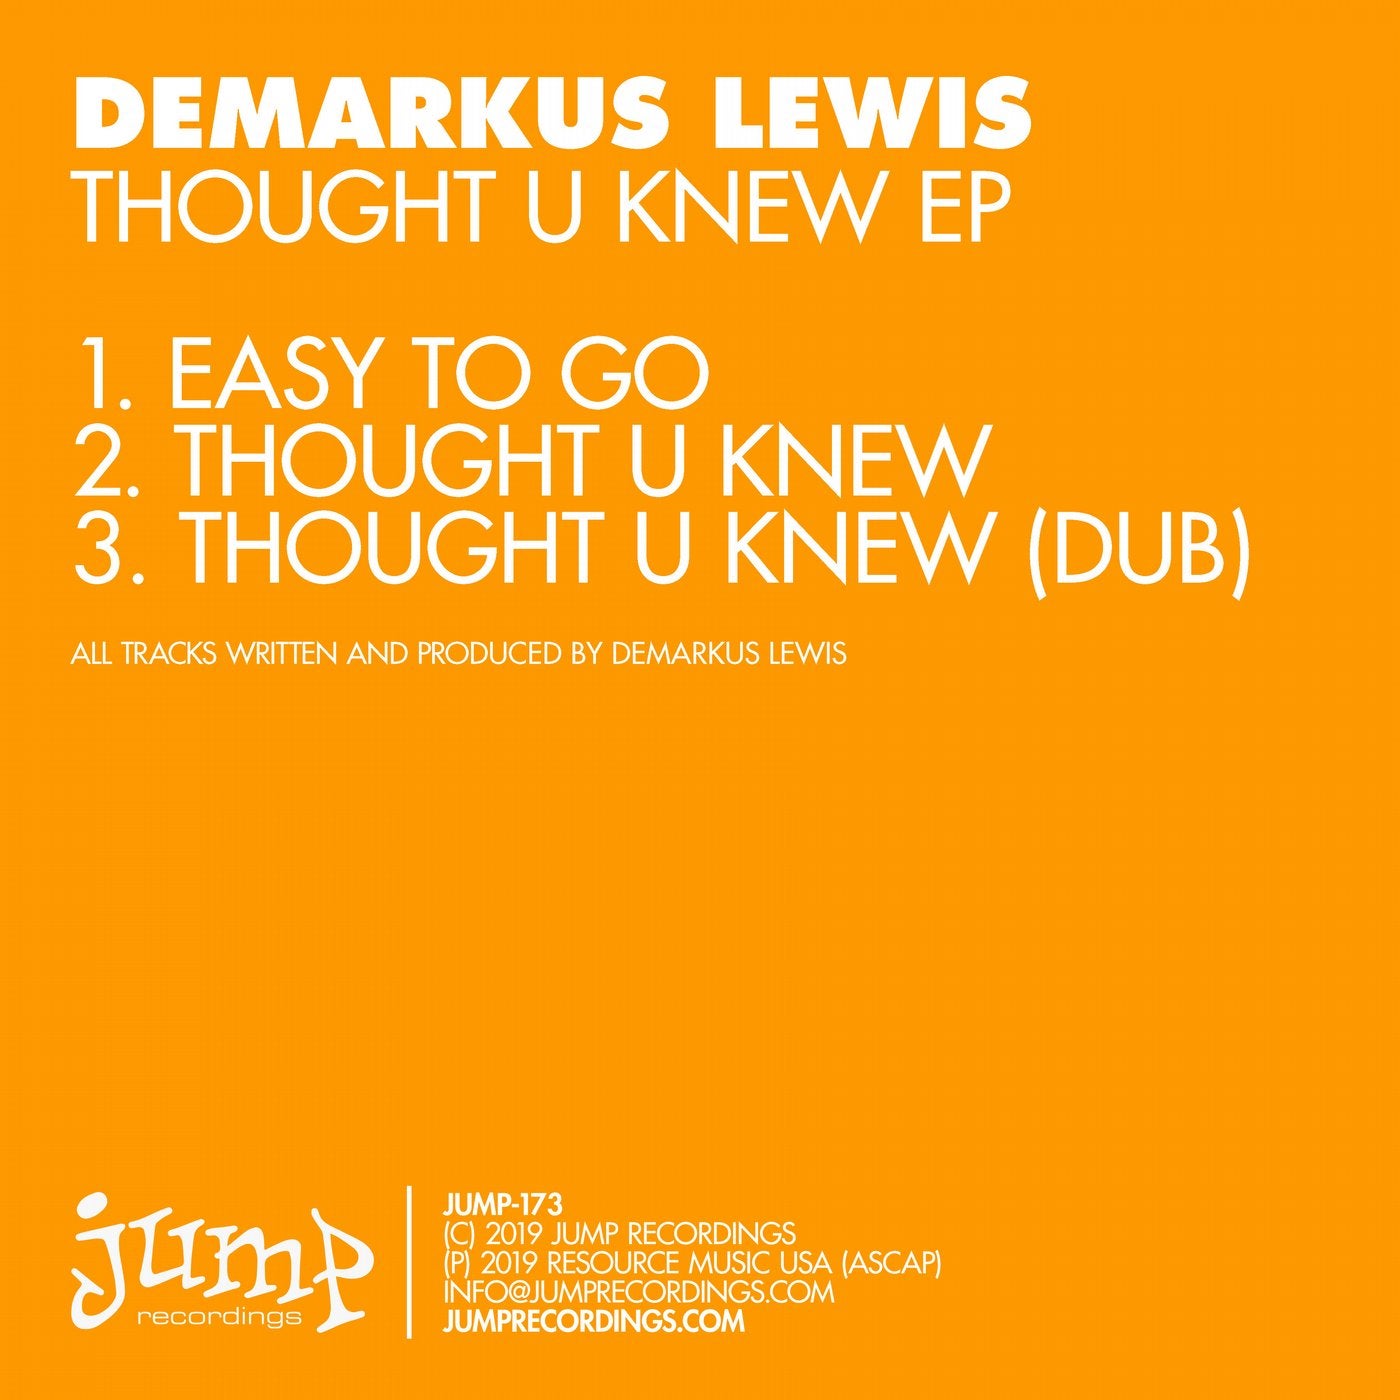 Thought U Knew EP